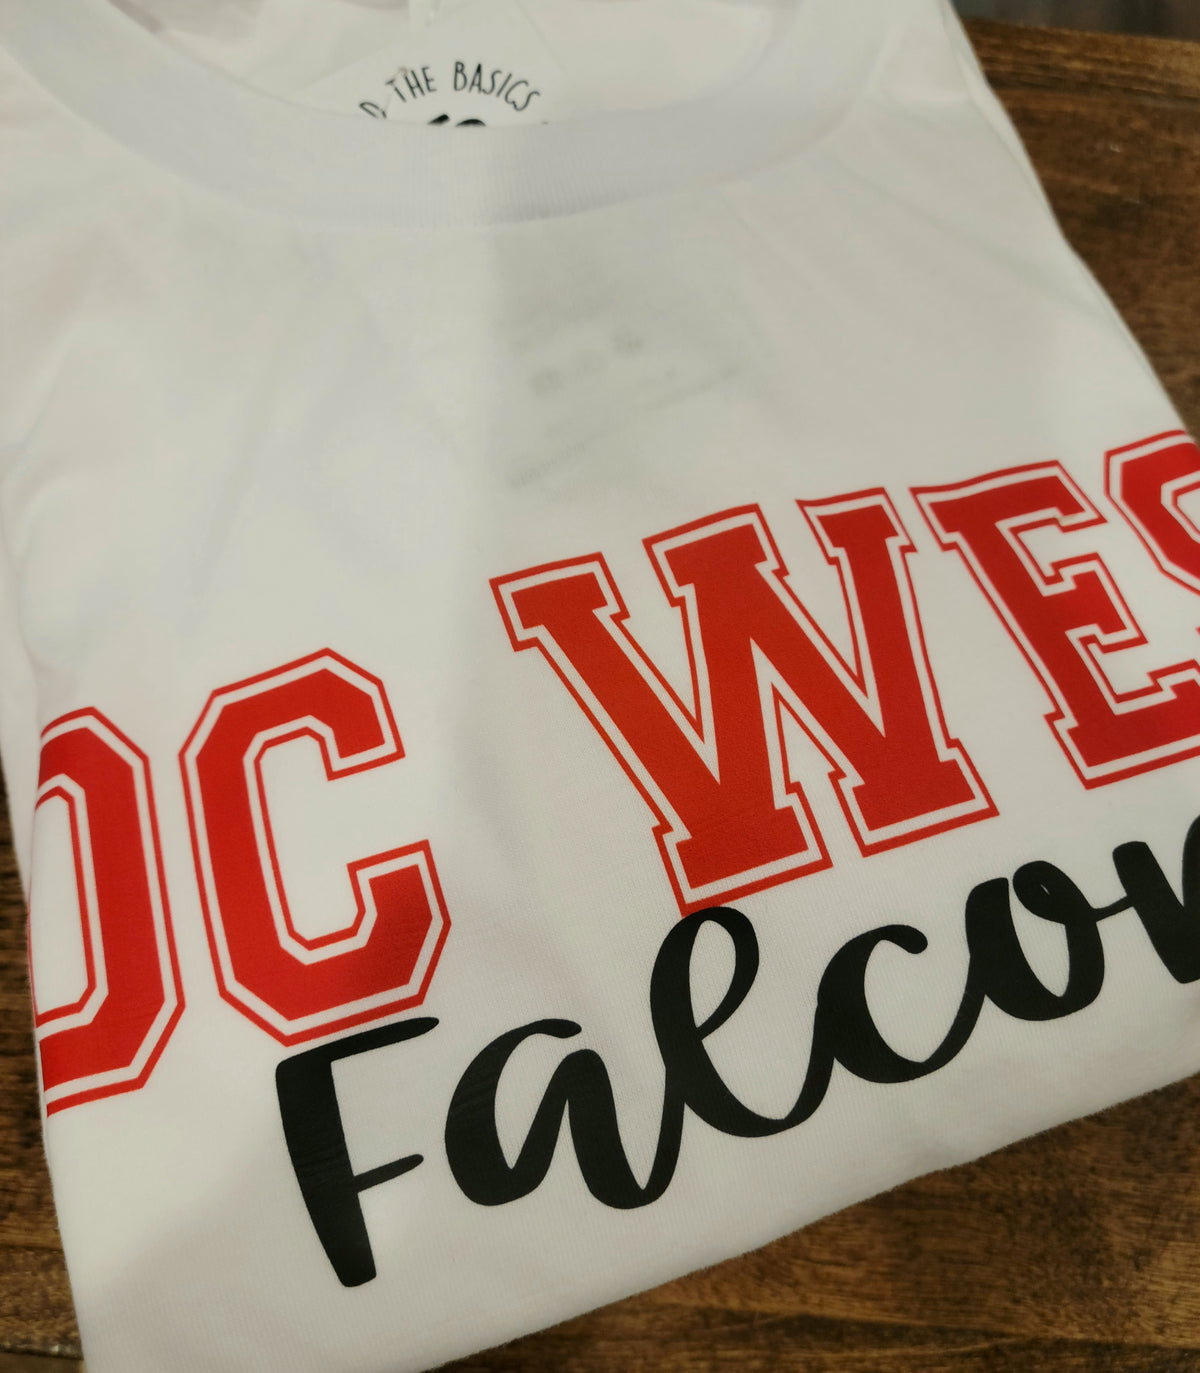 DC West Falcons Tee